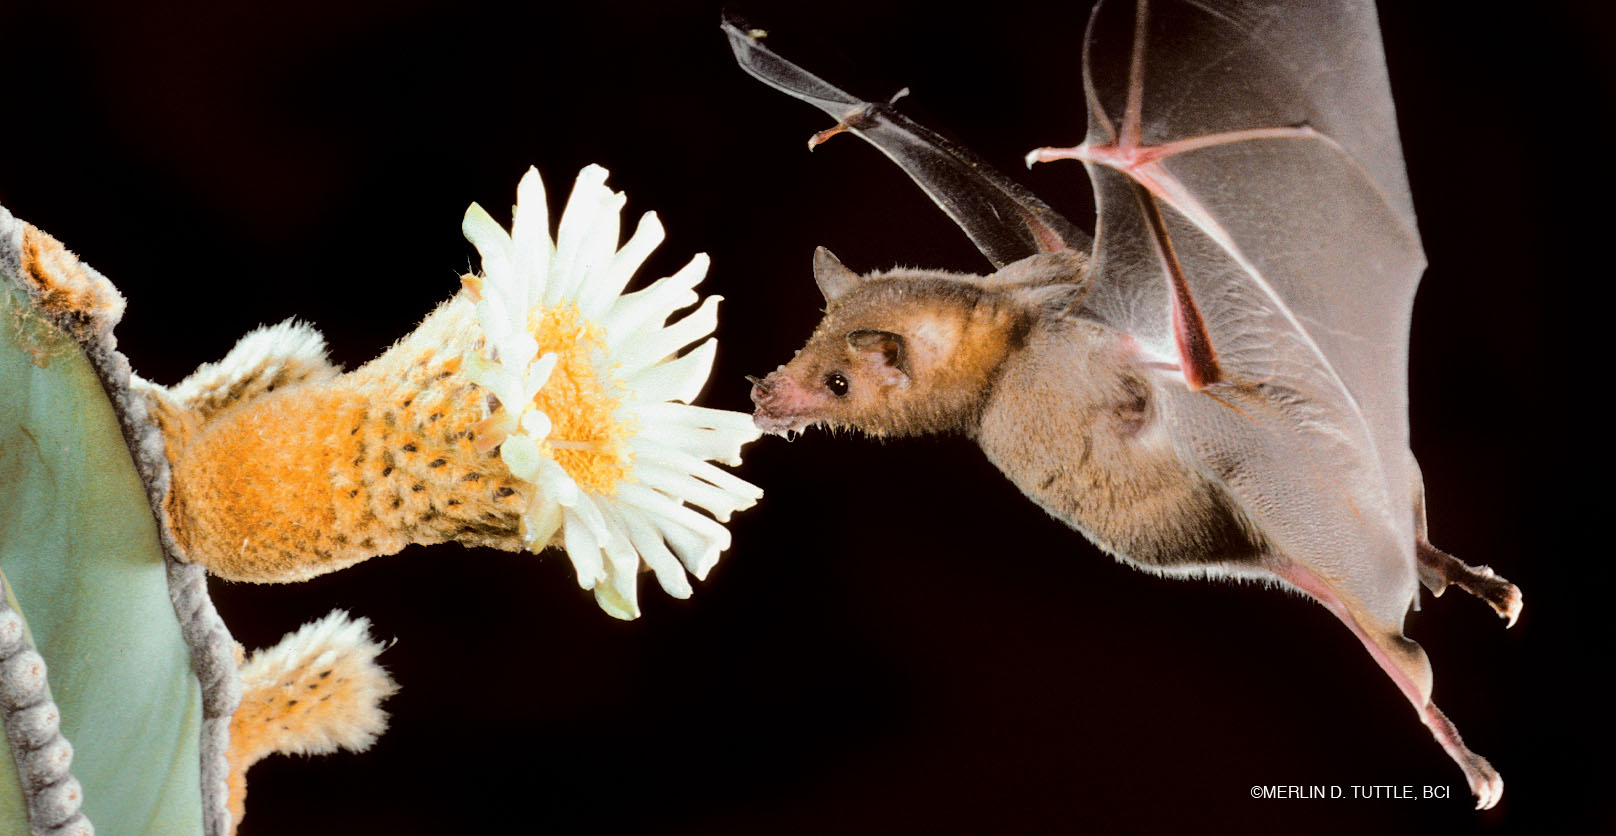 what is a group of bats called: A flock of bats flying